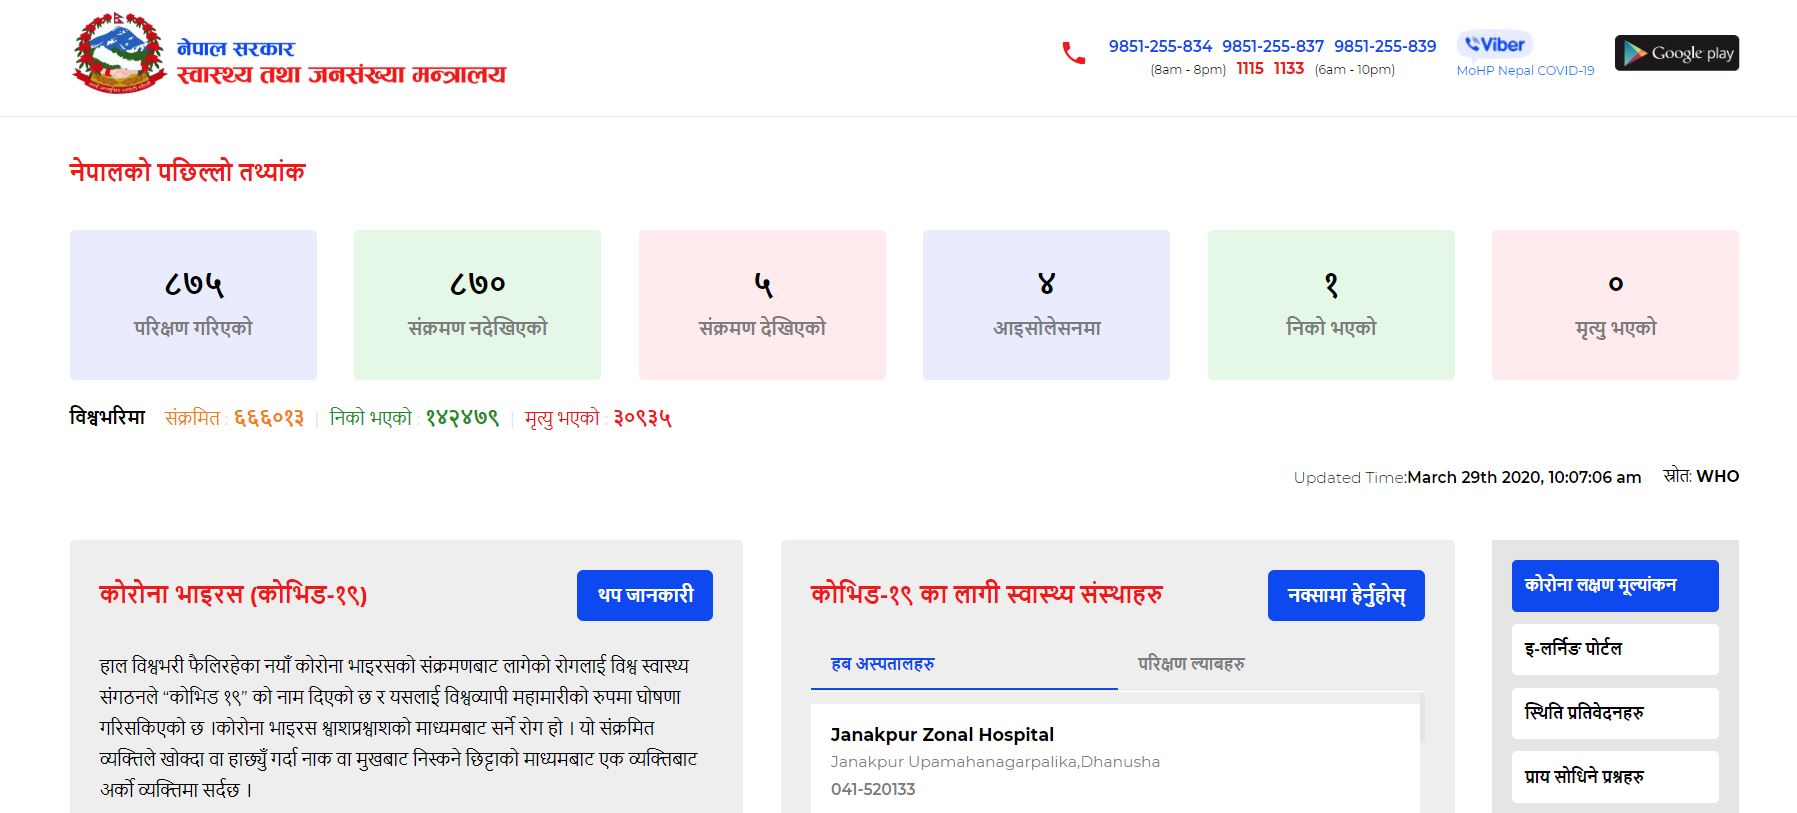 Website, mobile app launched on COVID-19